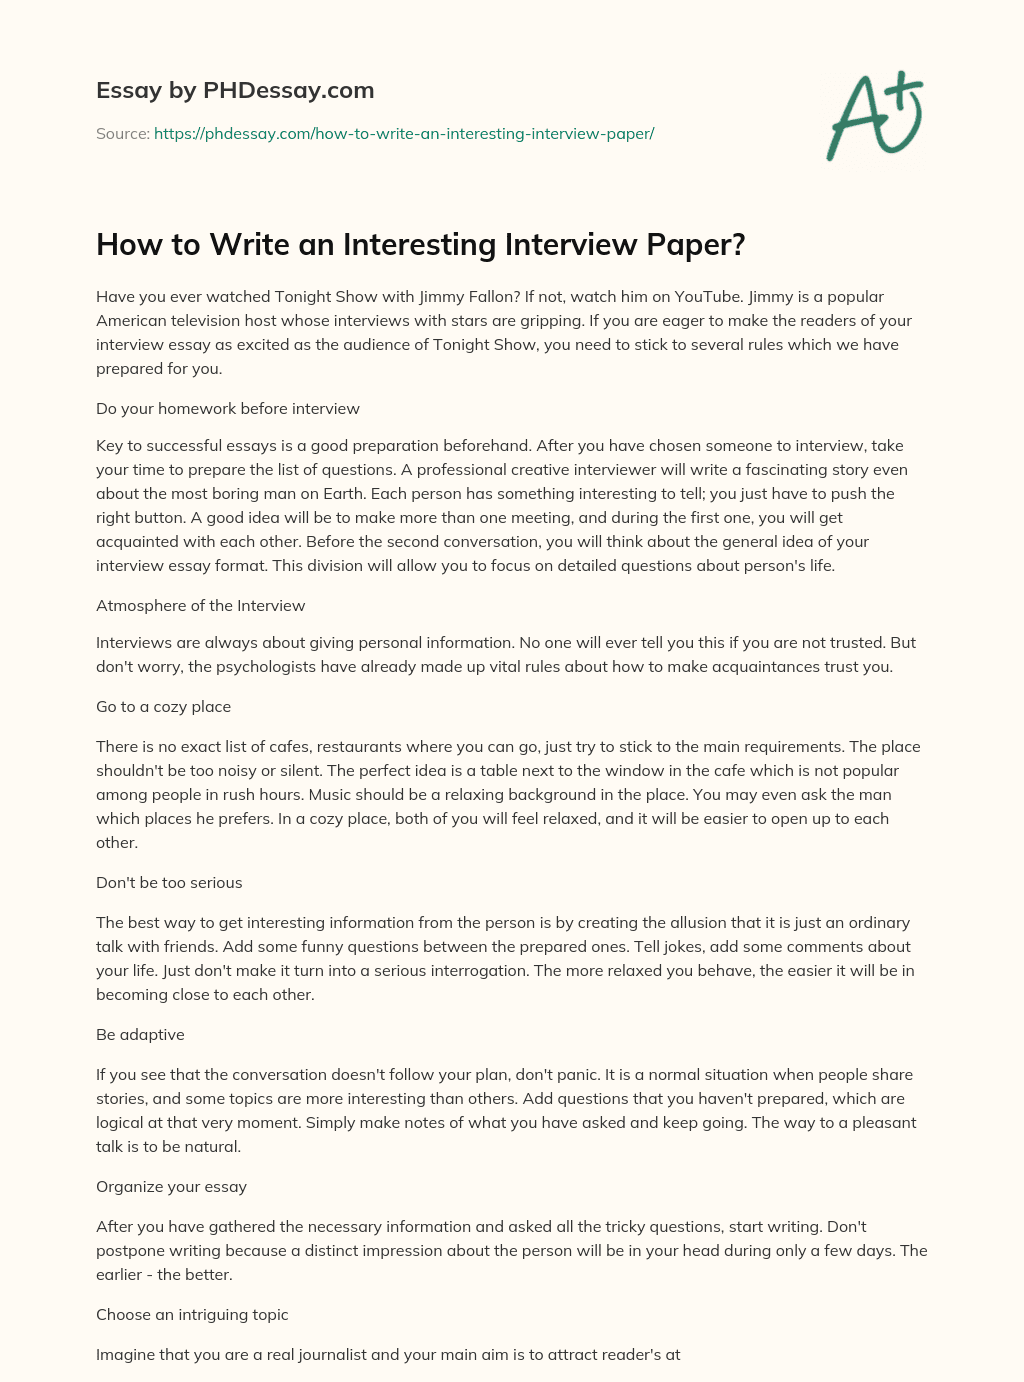 How to Write an Interesting Interview Paper? essay